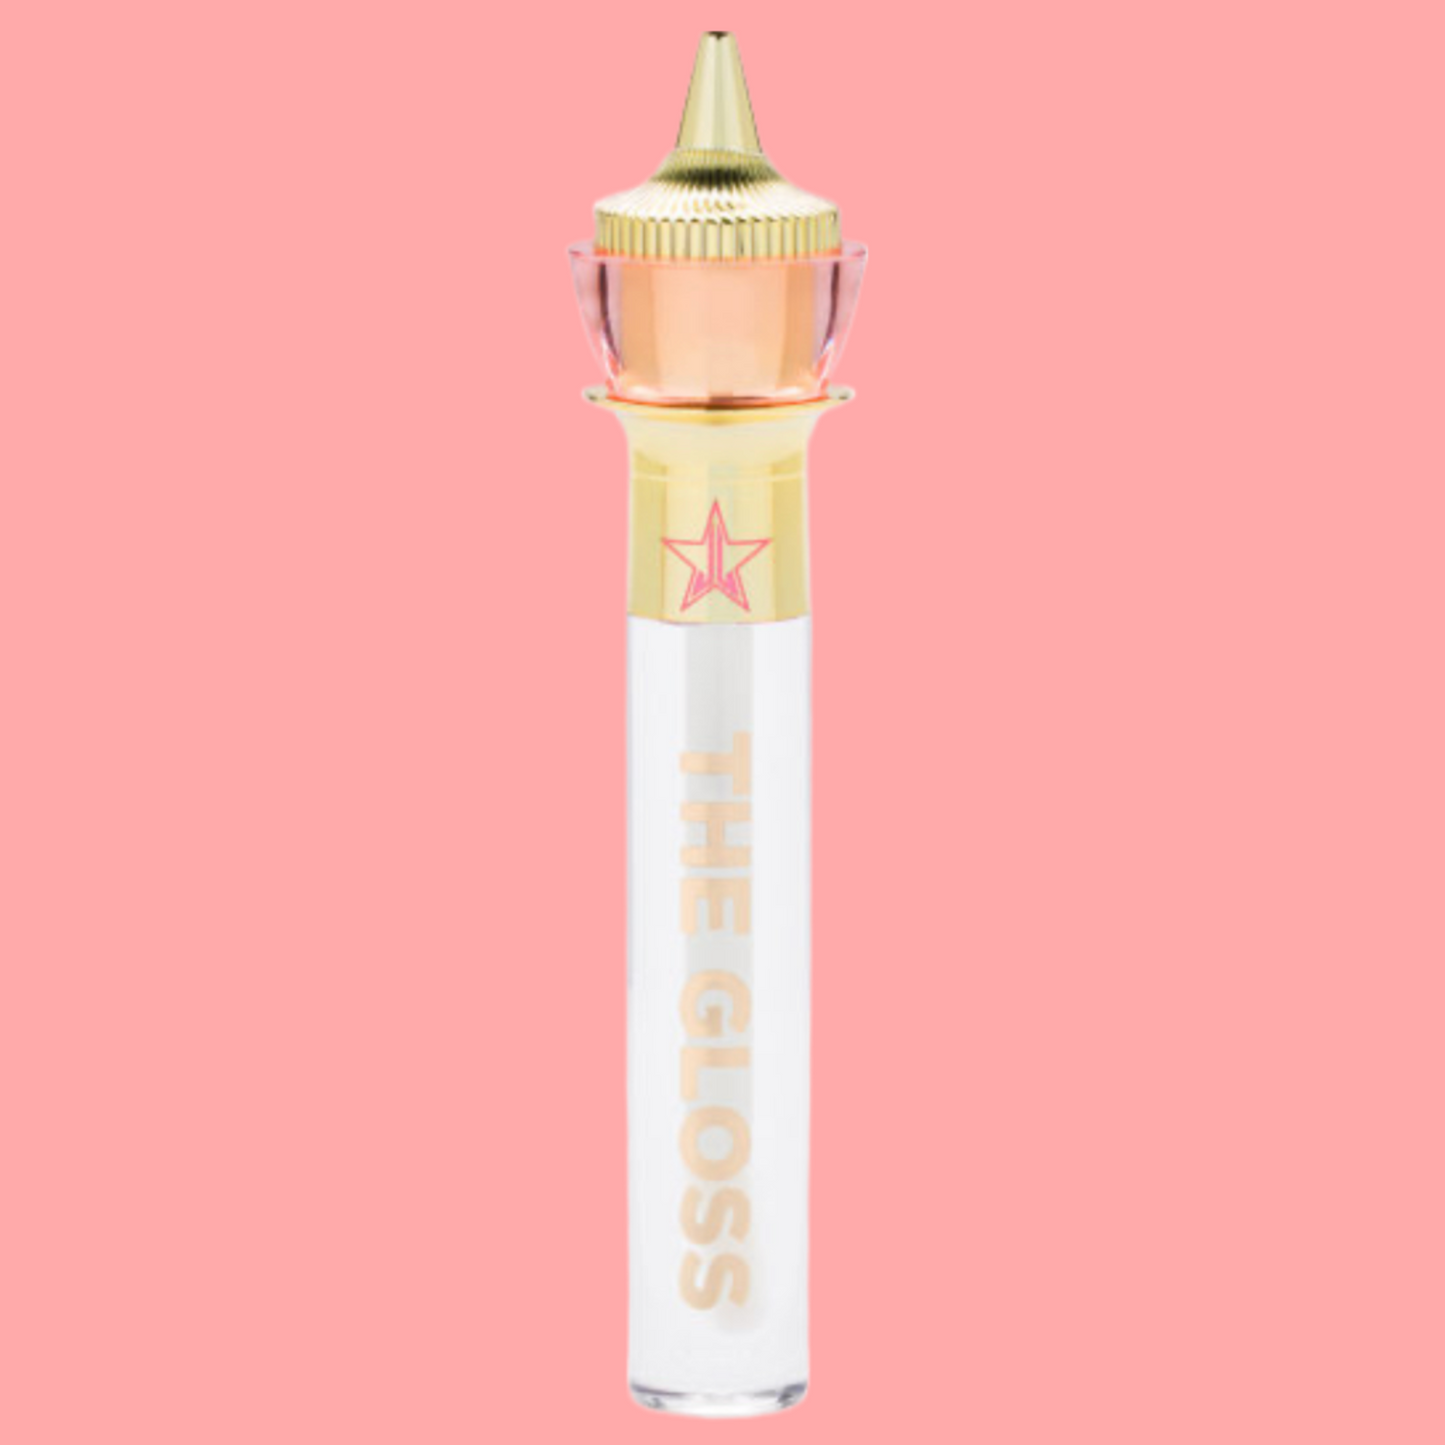 Jeffree Star Cosmetics Jeffree's High Shine Sickening The Gloss Lip Gloss - Let Me Be Perfectly Clear